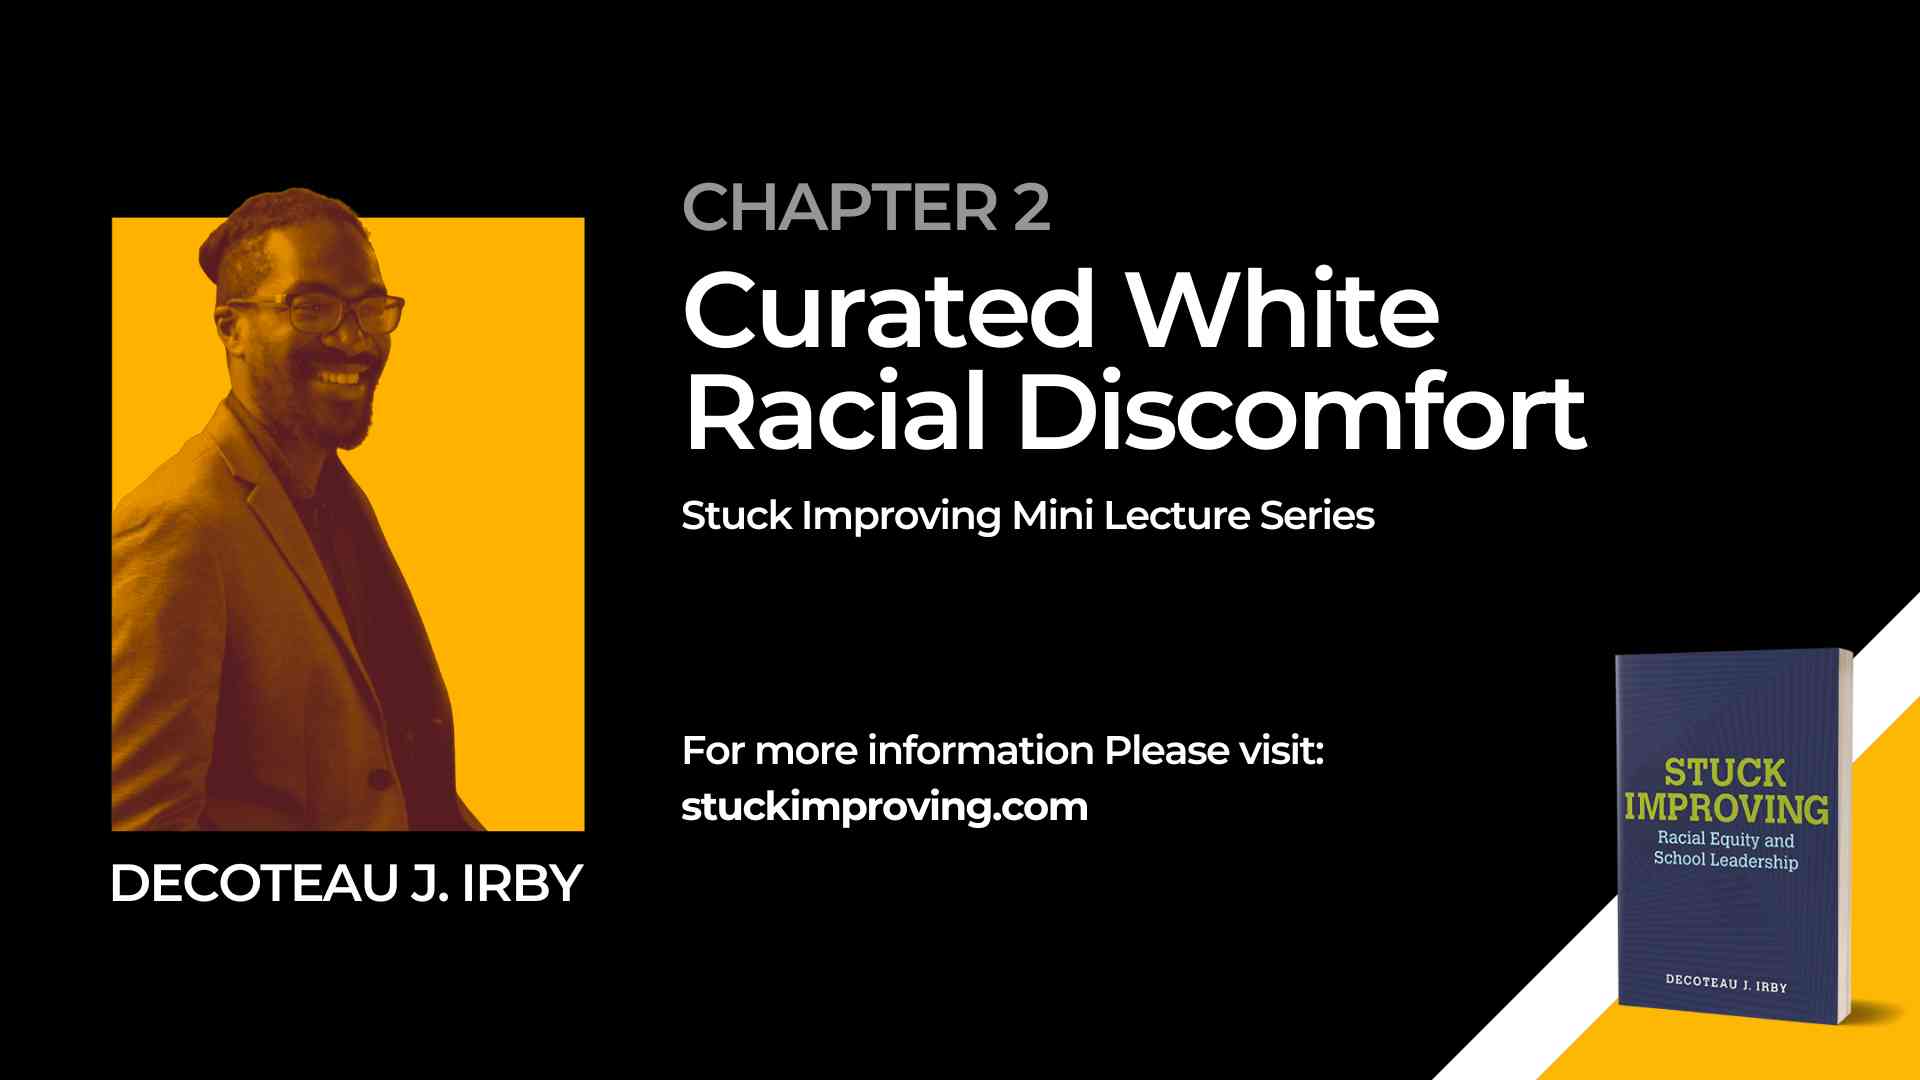 Chapter 2: Curated White Racial Discomfort